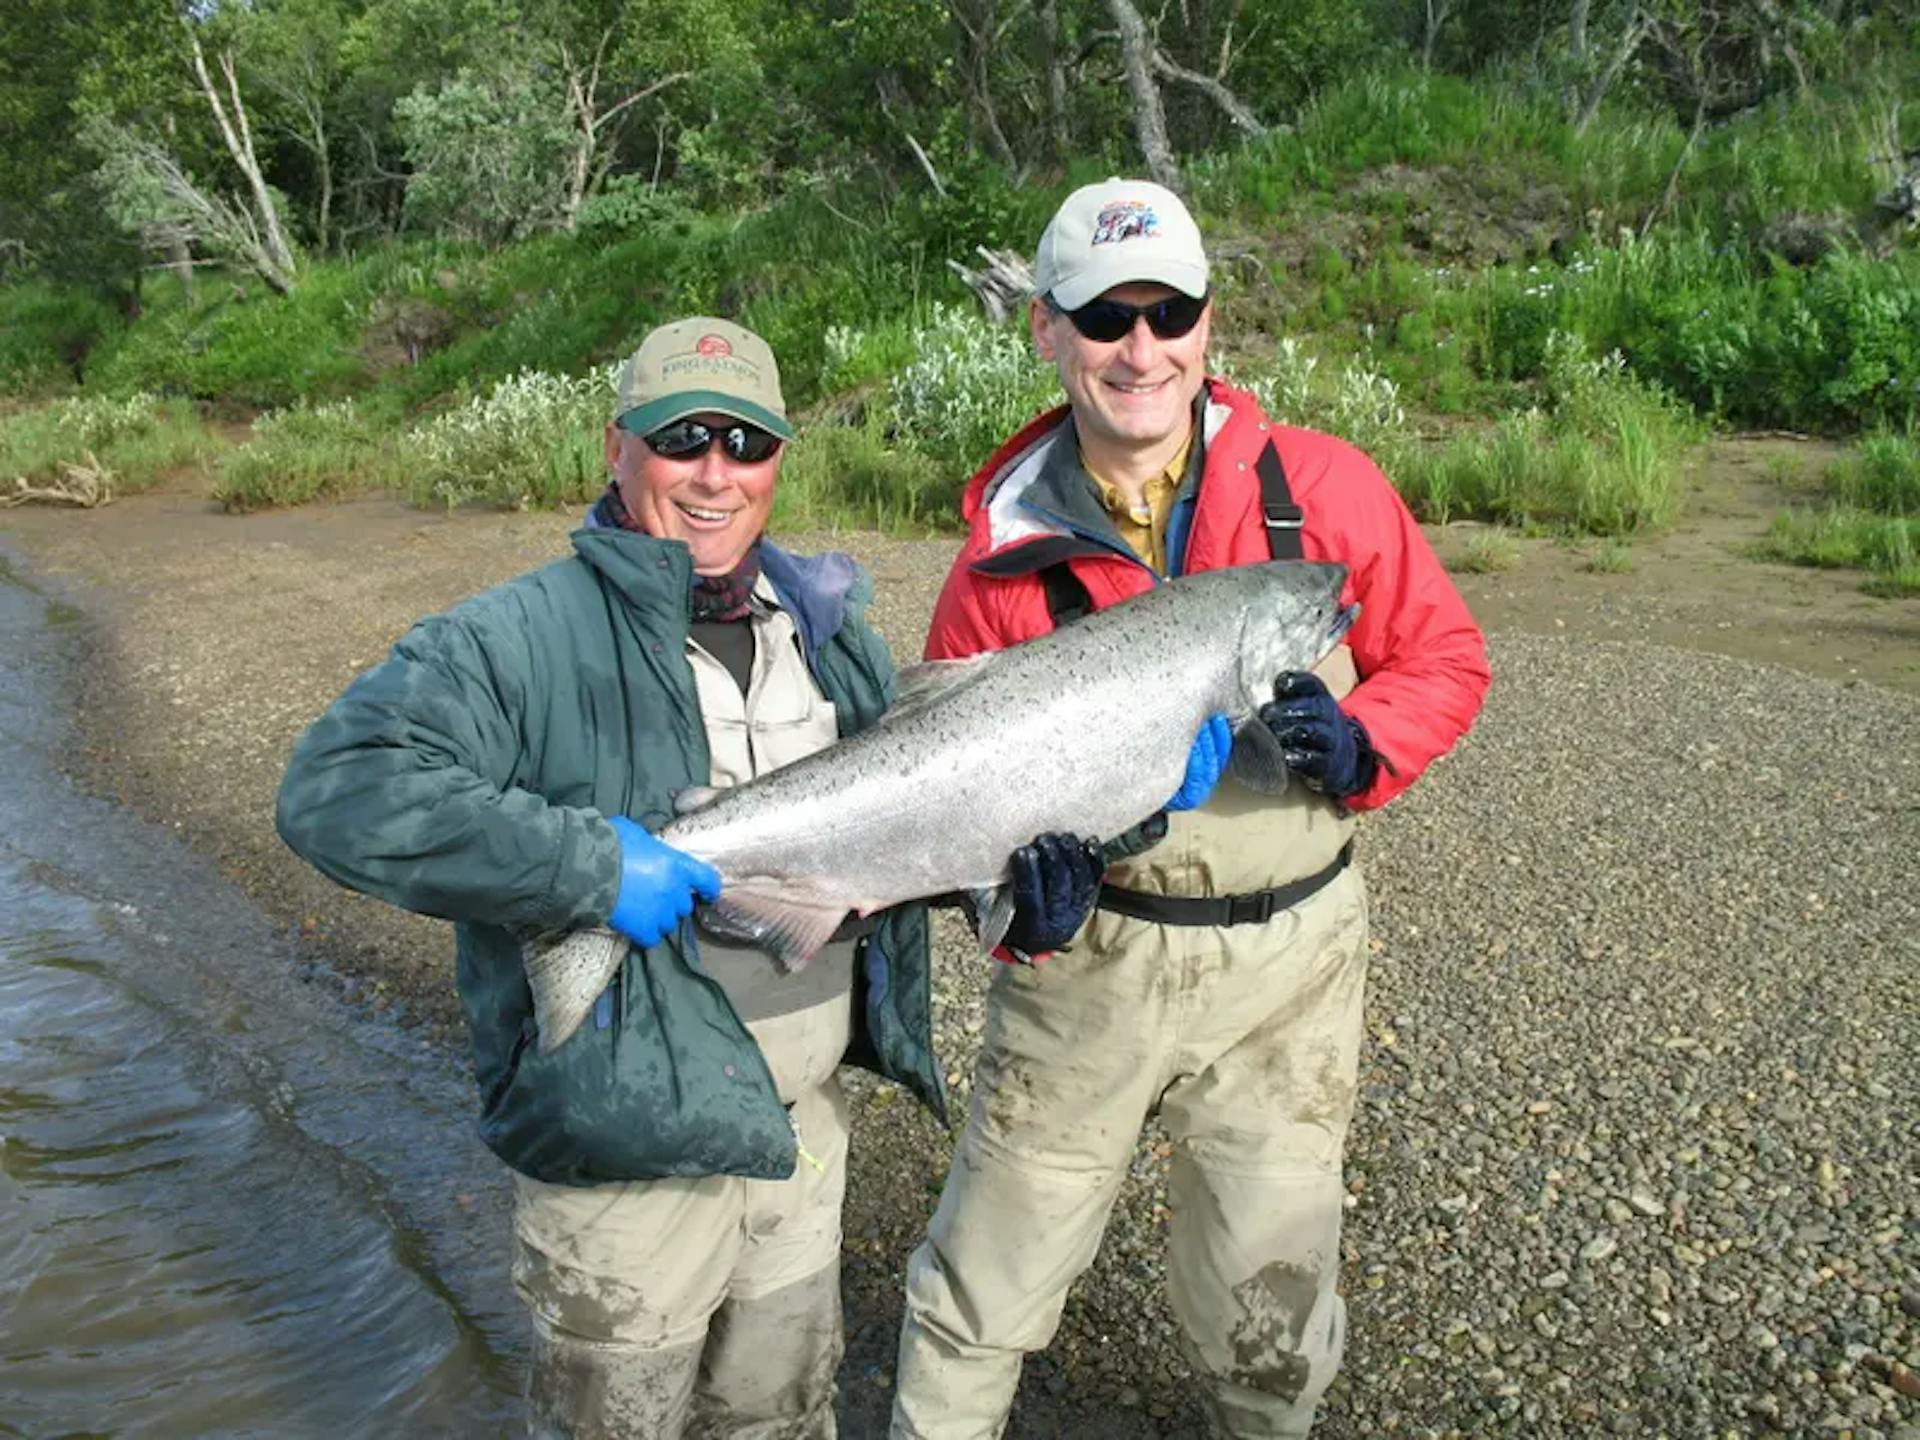 Alito in Alaska with a fishing guide. He stayed at the King Salmon Lodge, a luxury fishing resort that drew celebrities, wealthy businessmen and sports stars. Credit: Photo obtained by ProPublica